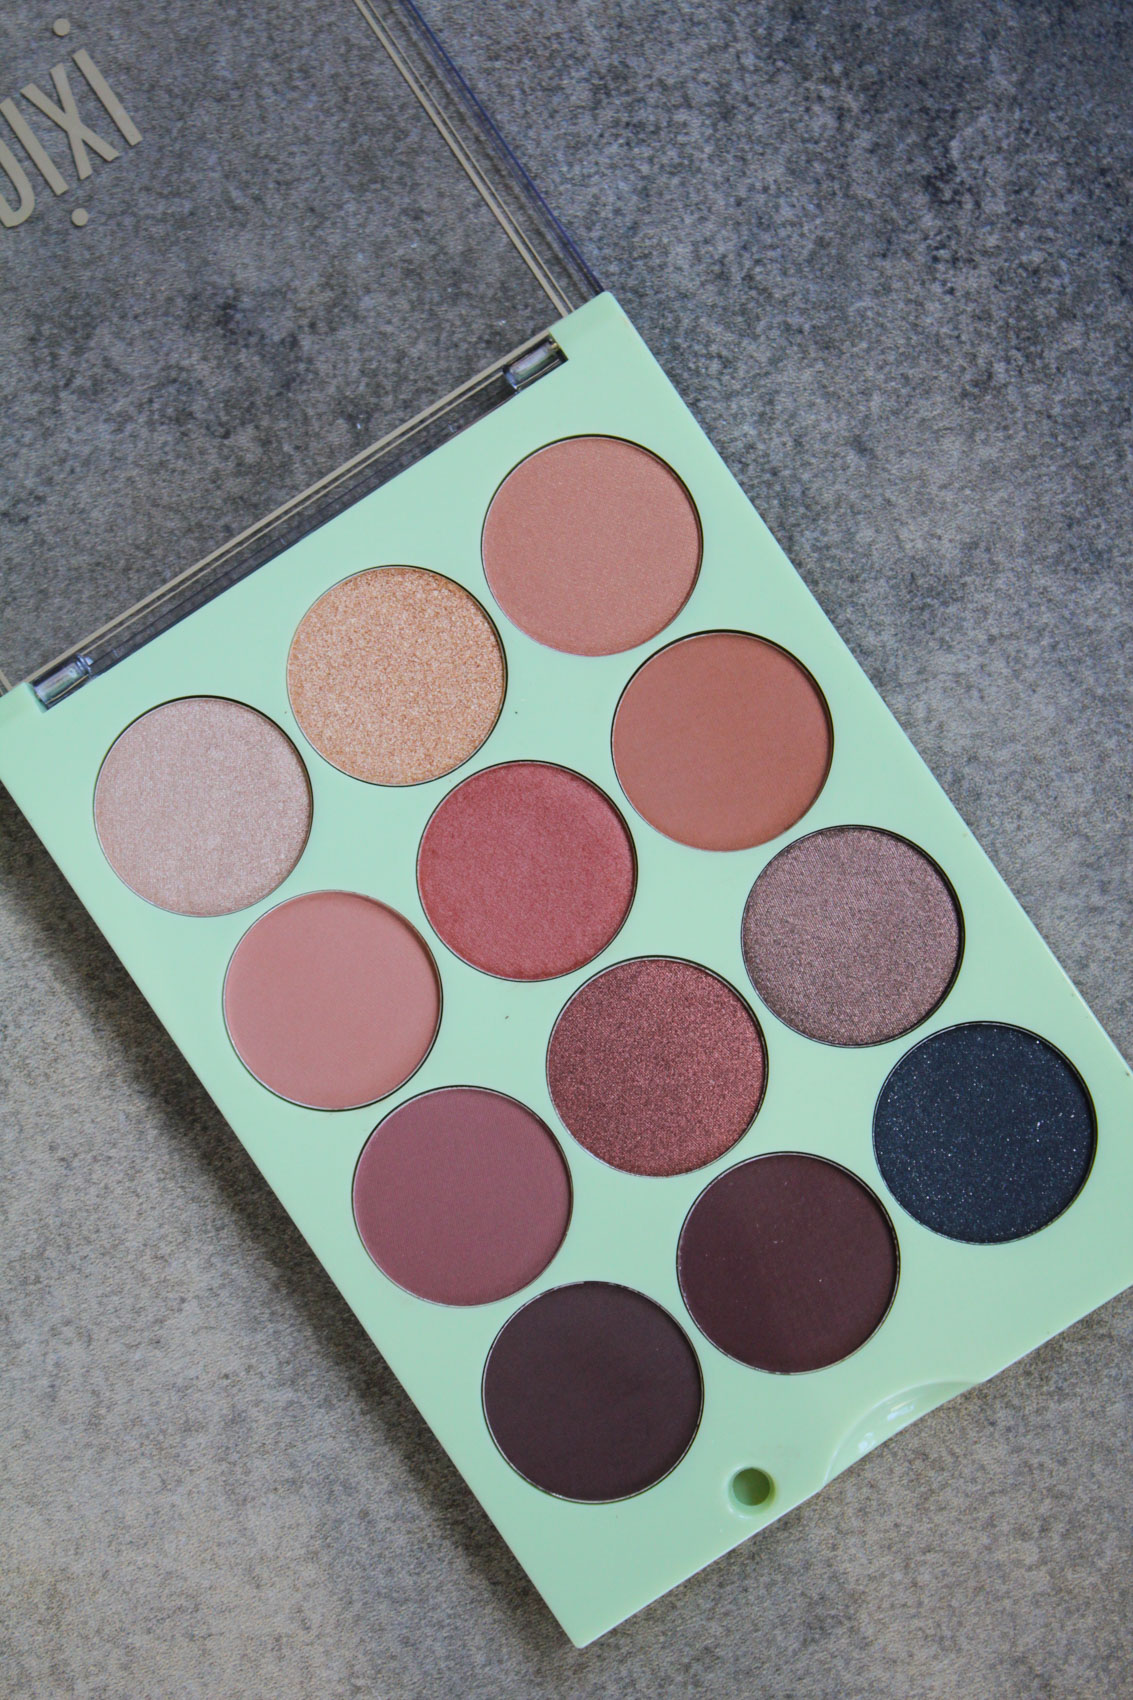 Get The Look - ItsEyeTime palette from @pixibeauty